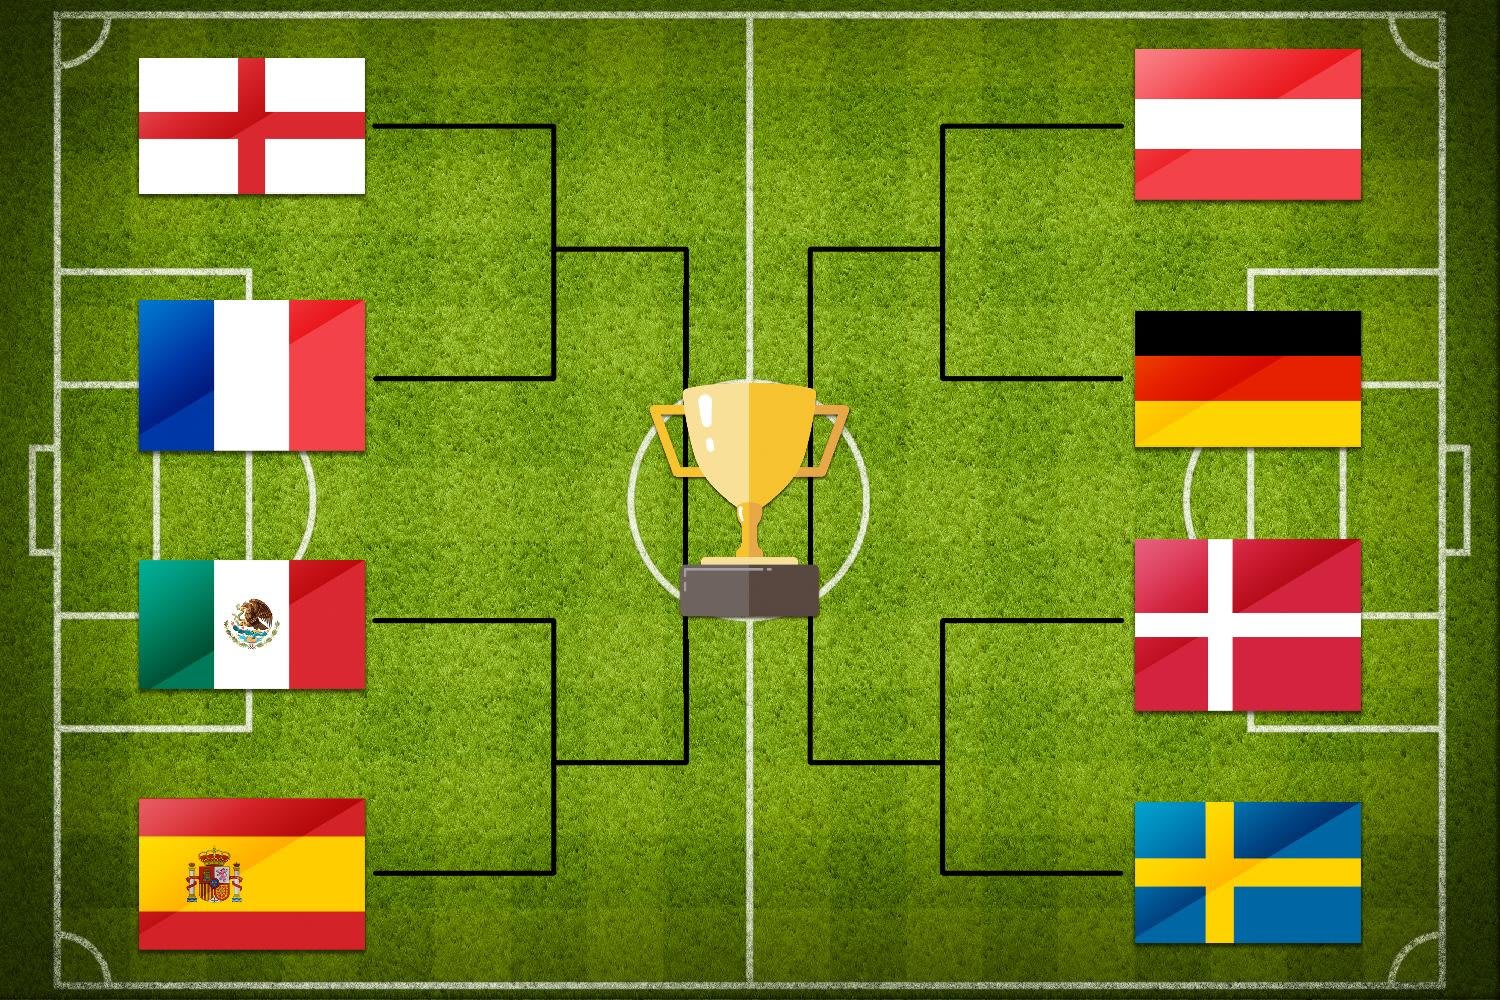 FUN GAME: Guess the international team by their XI on World Cup